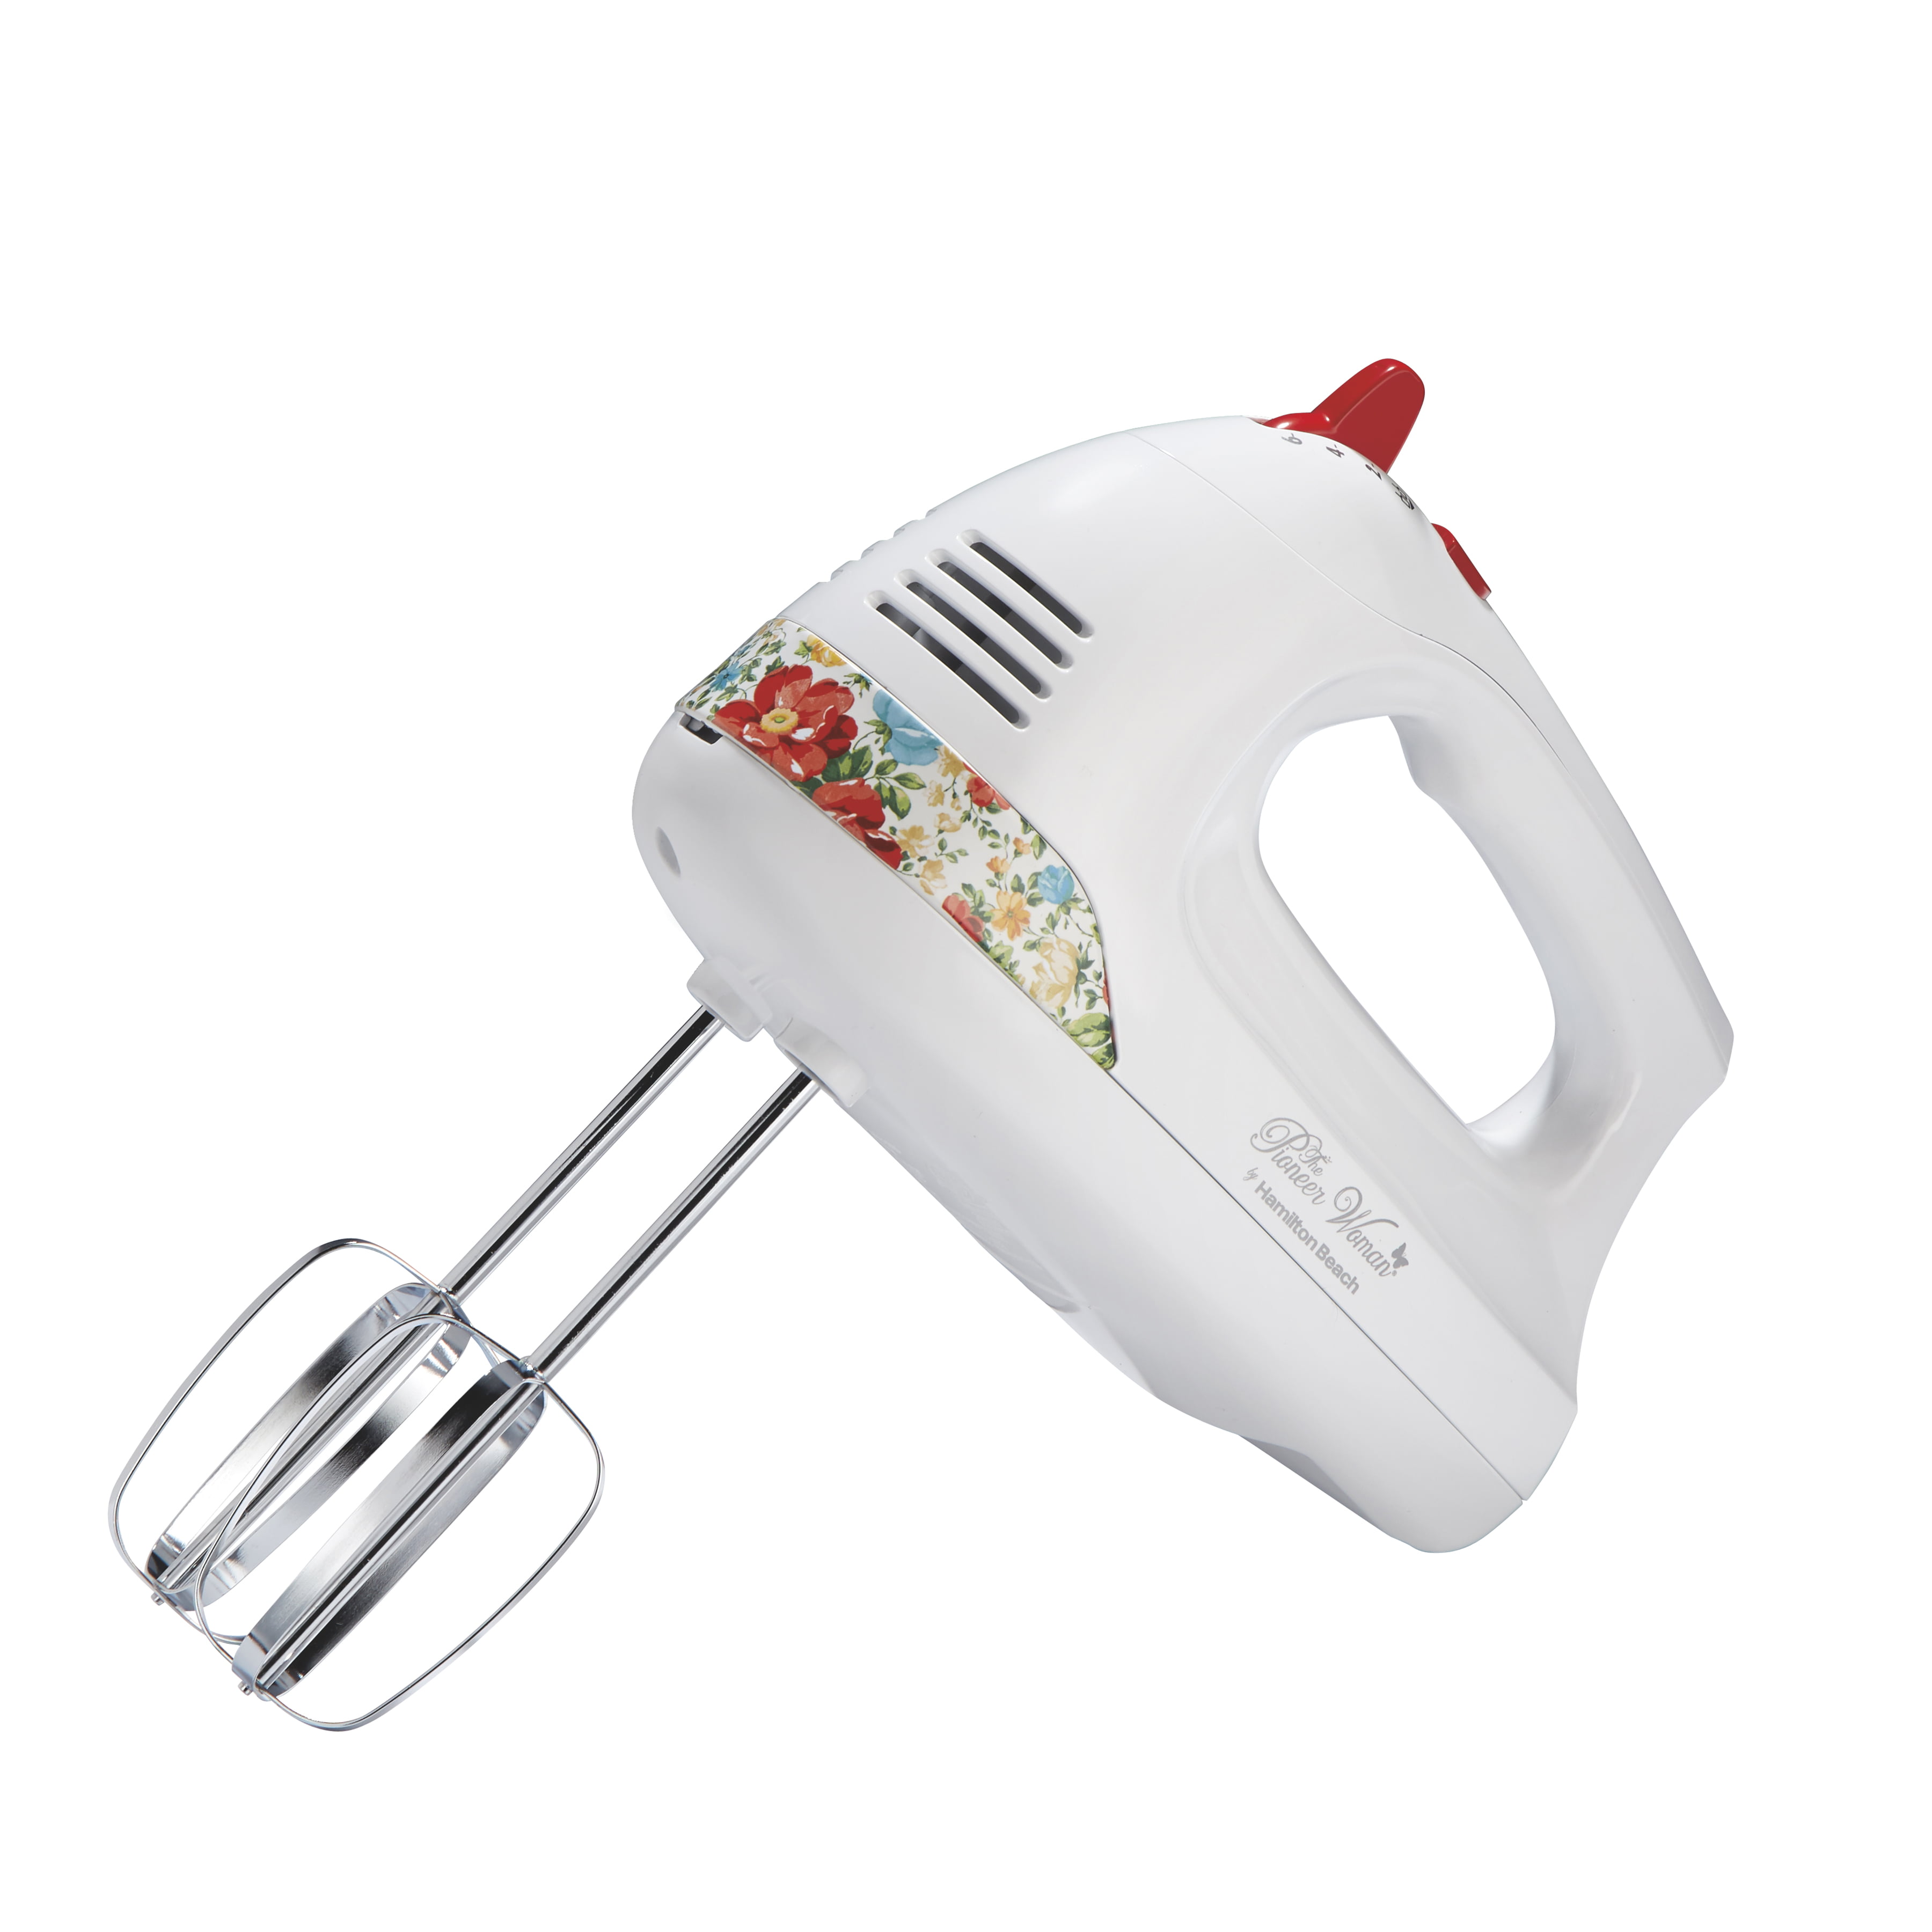 BN Products BNR6500 Hand Held Mixer